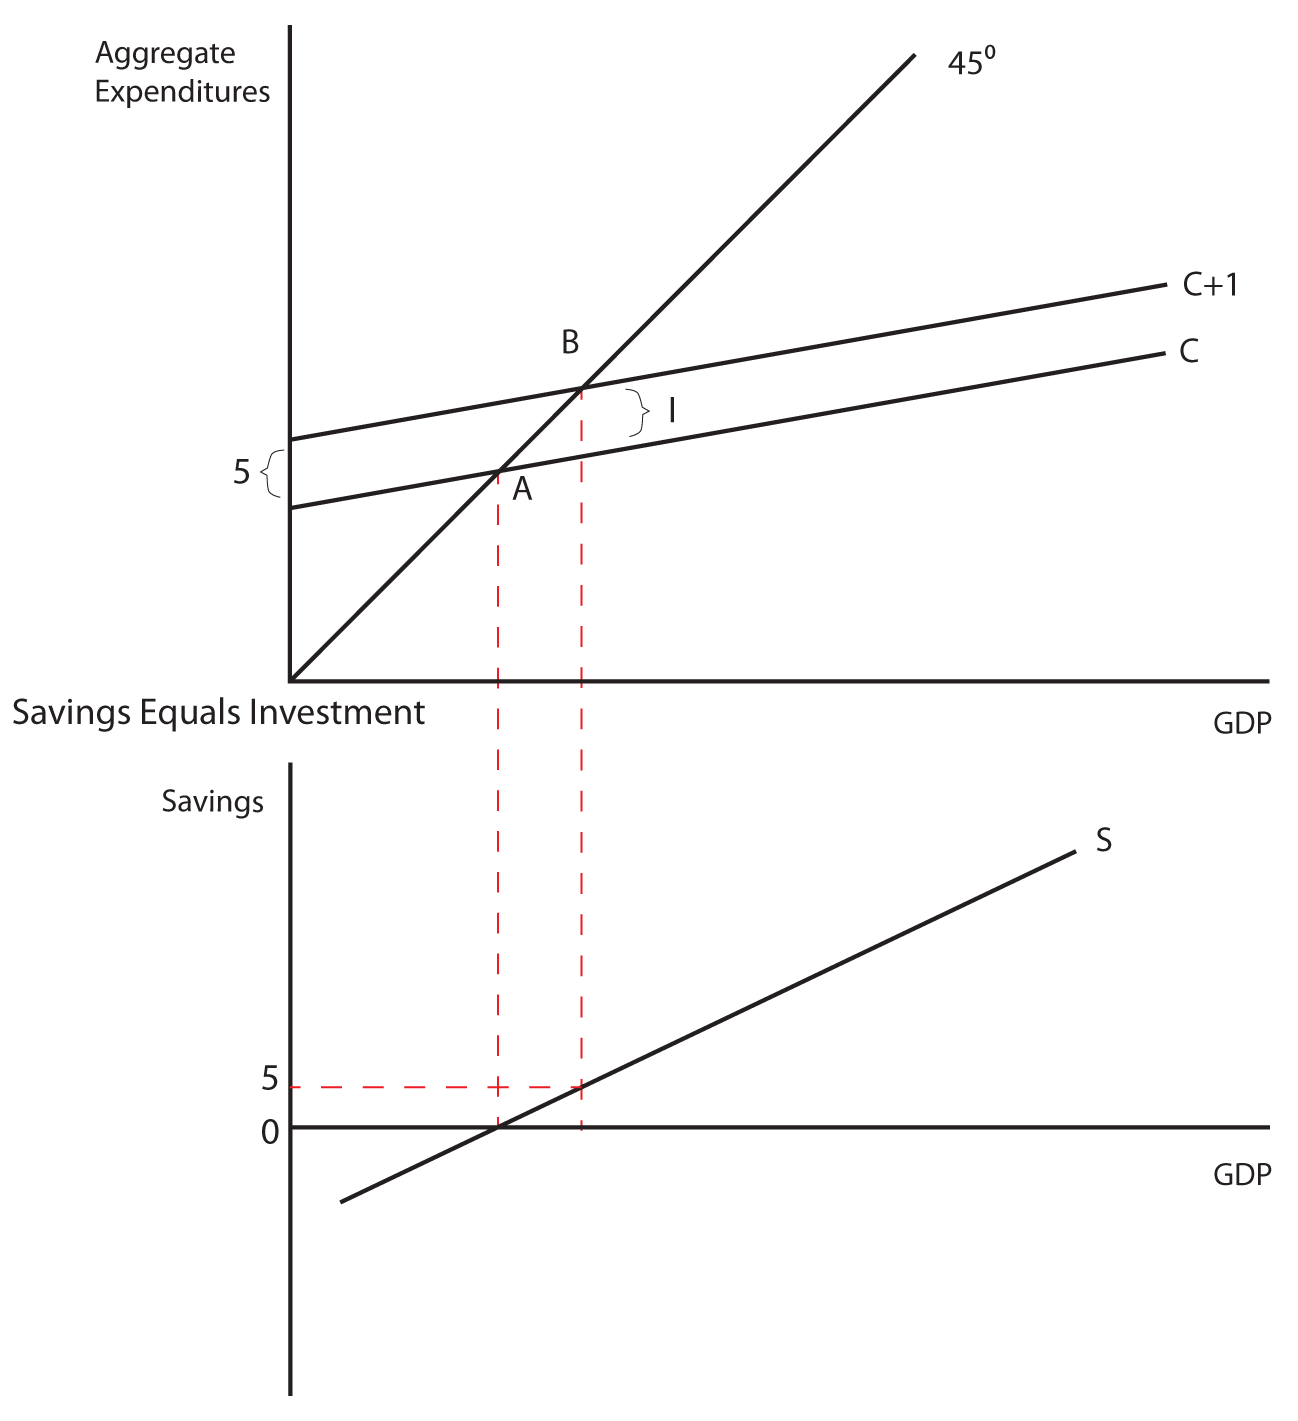 Image 7.03: The picture shows a graph. The y axis is labeled Aggregate Expenditures, and the x axis is labeled GDP. A 45 degree line is drawn from the origin. A line with the slope of C originates higher on the y axis and intersects the 45 degree line at point A. A line with the slope of C + 1 originates 5 units higher on the y axis than the line with the slope of C and intersects the 45 degree line at point B. A vertical line is drawn from point A to another graph. A vertical line is drawn from point B to the other graph, as well. The y axis is labeled Savings, and the x axis is labeled GDP. A line of slope S intersects the x axis at a point equivilent to point A in the first graph. The second vertical line connects point B to line S at the value of five units on the y axis of the savings graph. The area between line C+1 and line C is labeled I.